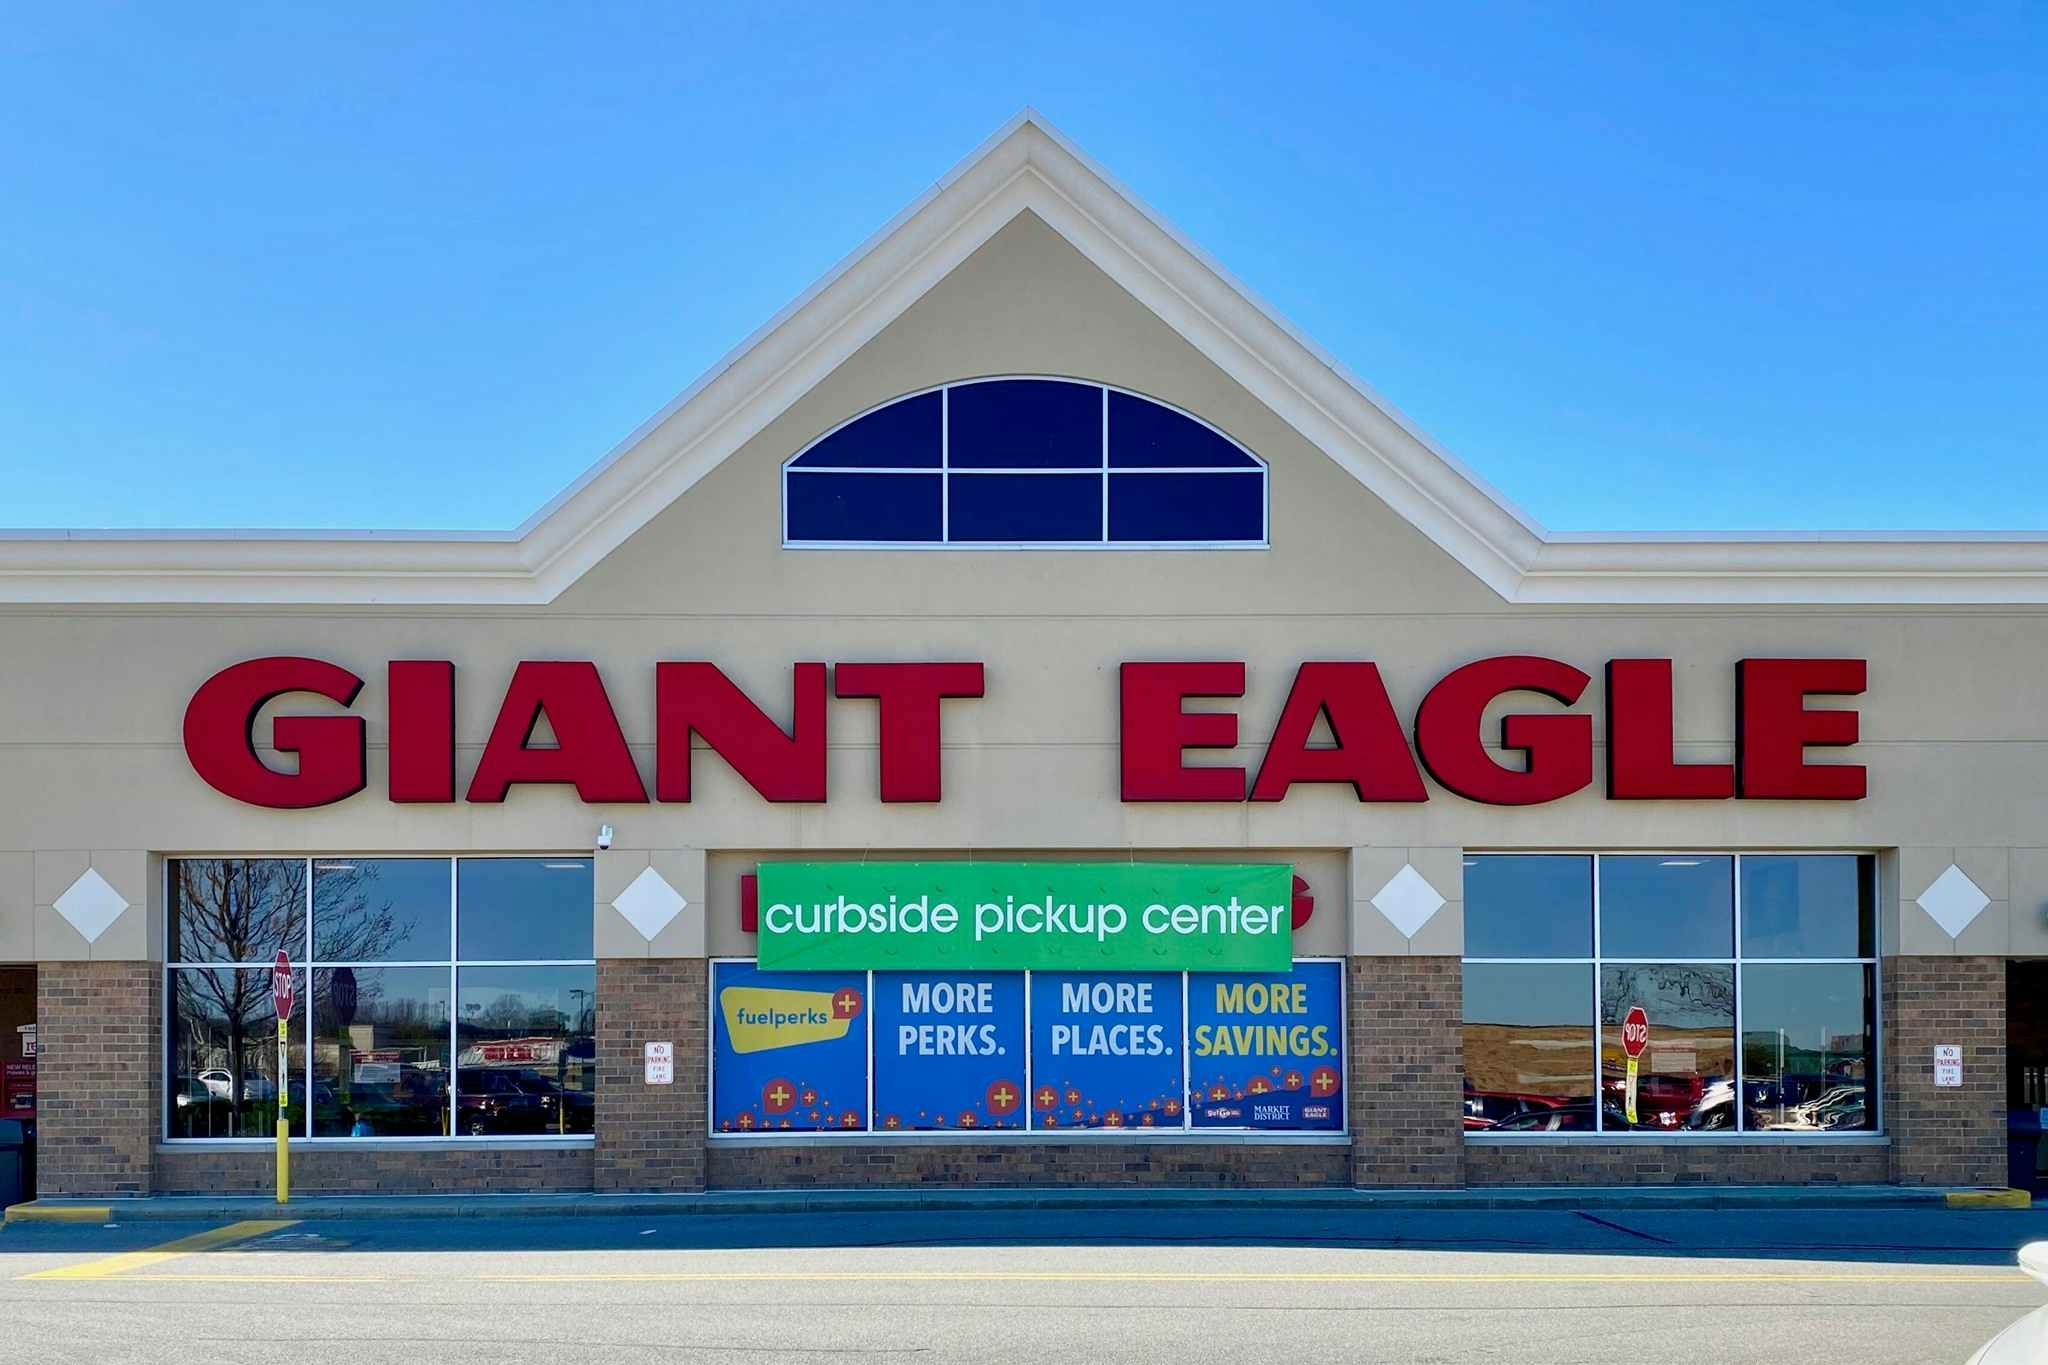 a Giant Eagle store front with a large banner that says "curbside pickup center